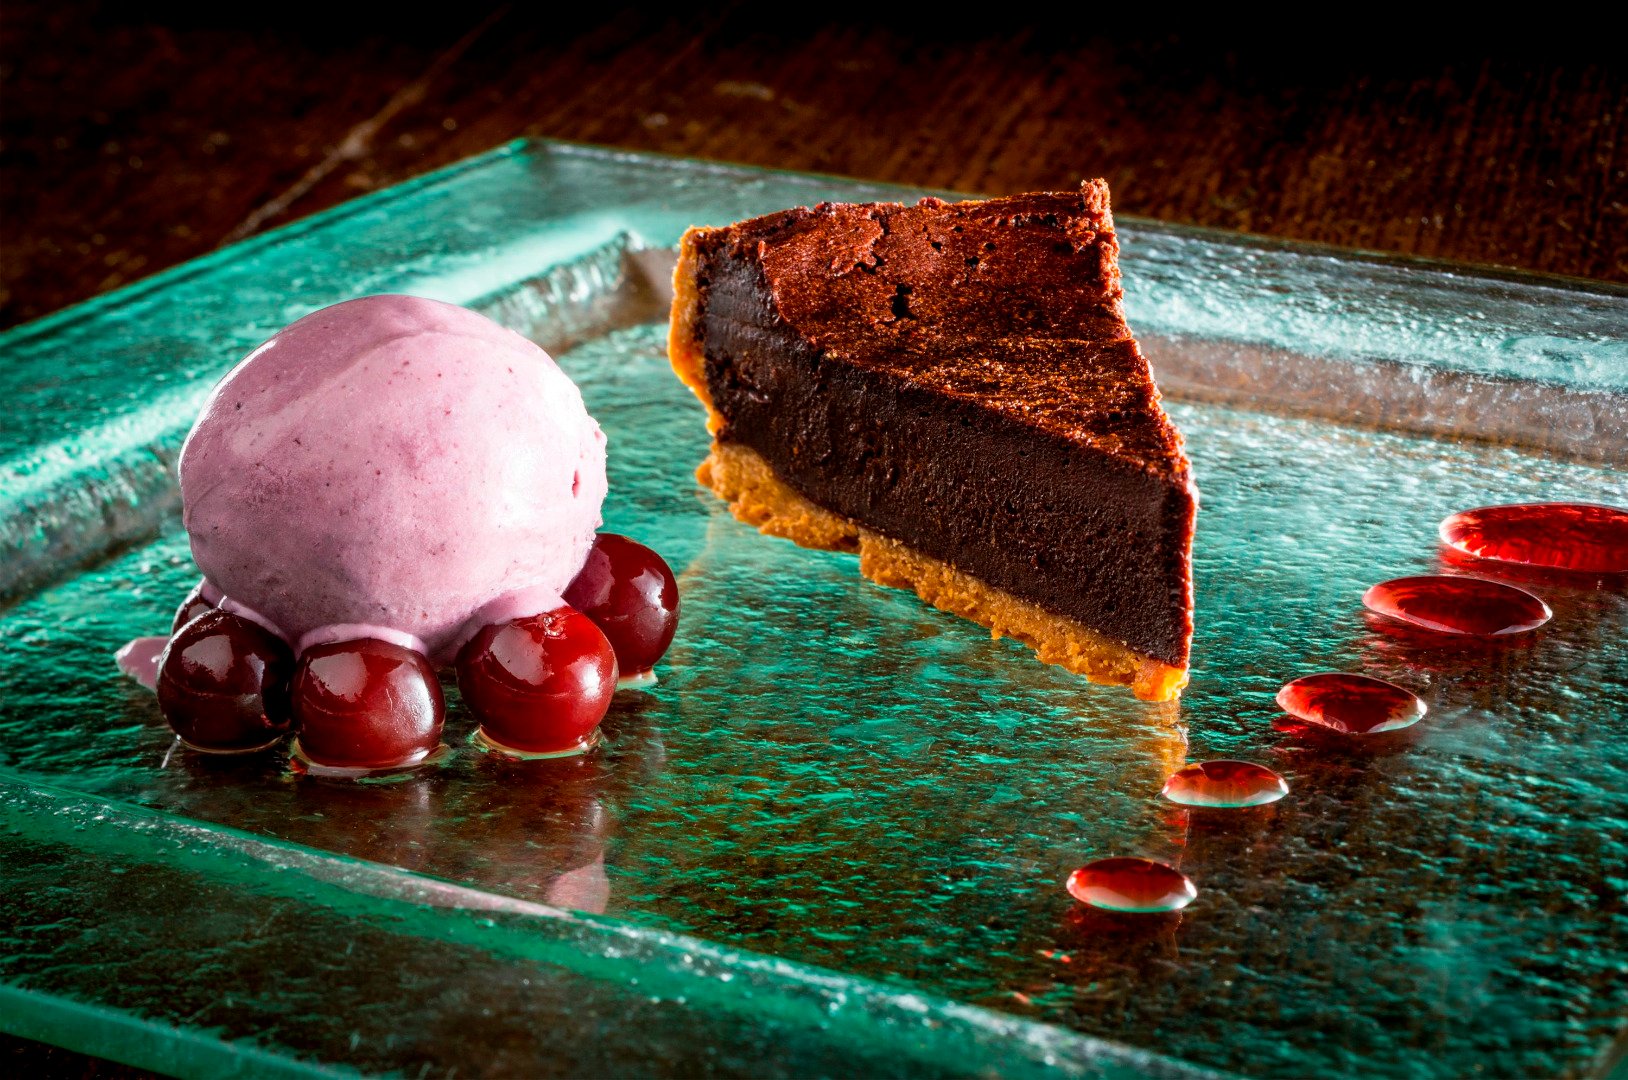 Image name homemade chocolate tart with cherry ice cream cherries the blue lion inn east witton the good pub guide inn of the year 20141 the 16 image from the post Eating out in the Yorkshire Dales in Yorkshire.com.